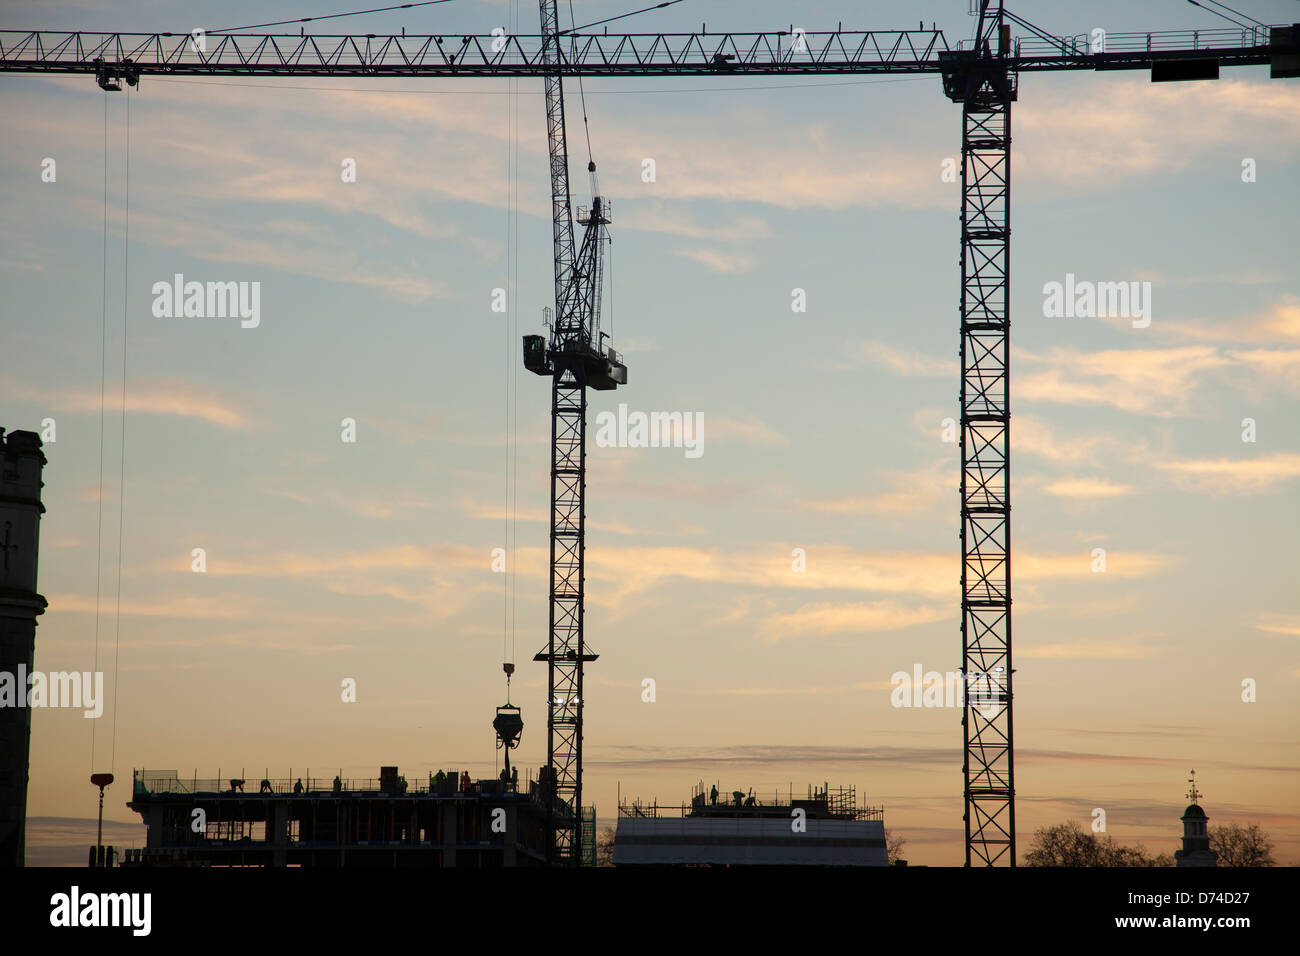 Construction, Cranes silhouetted against sunset, London, UK Stock Photo